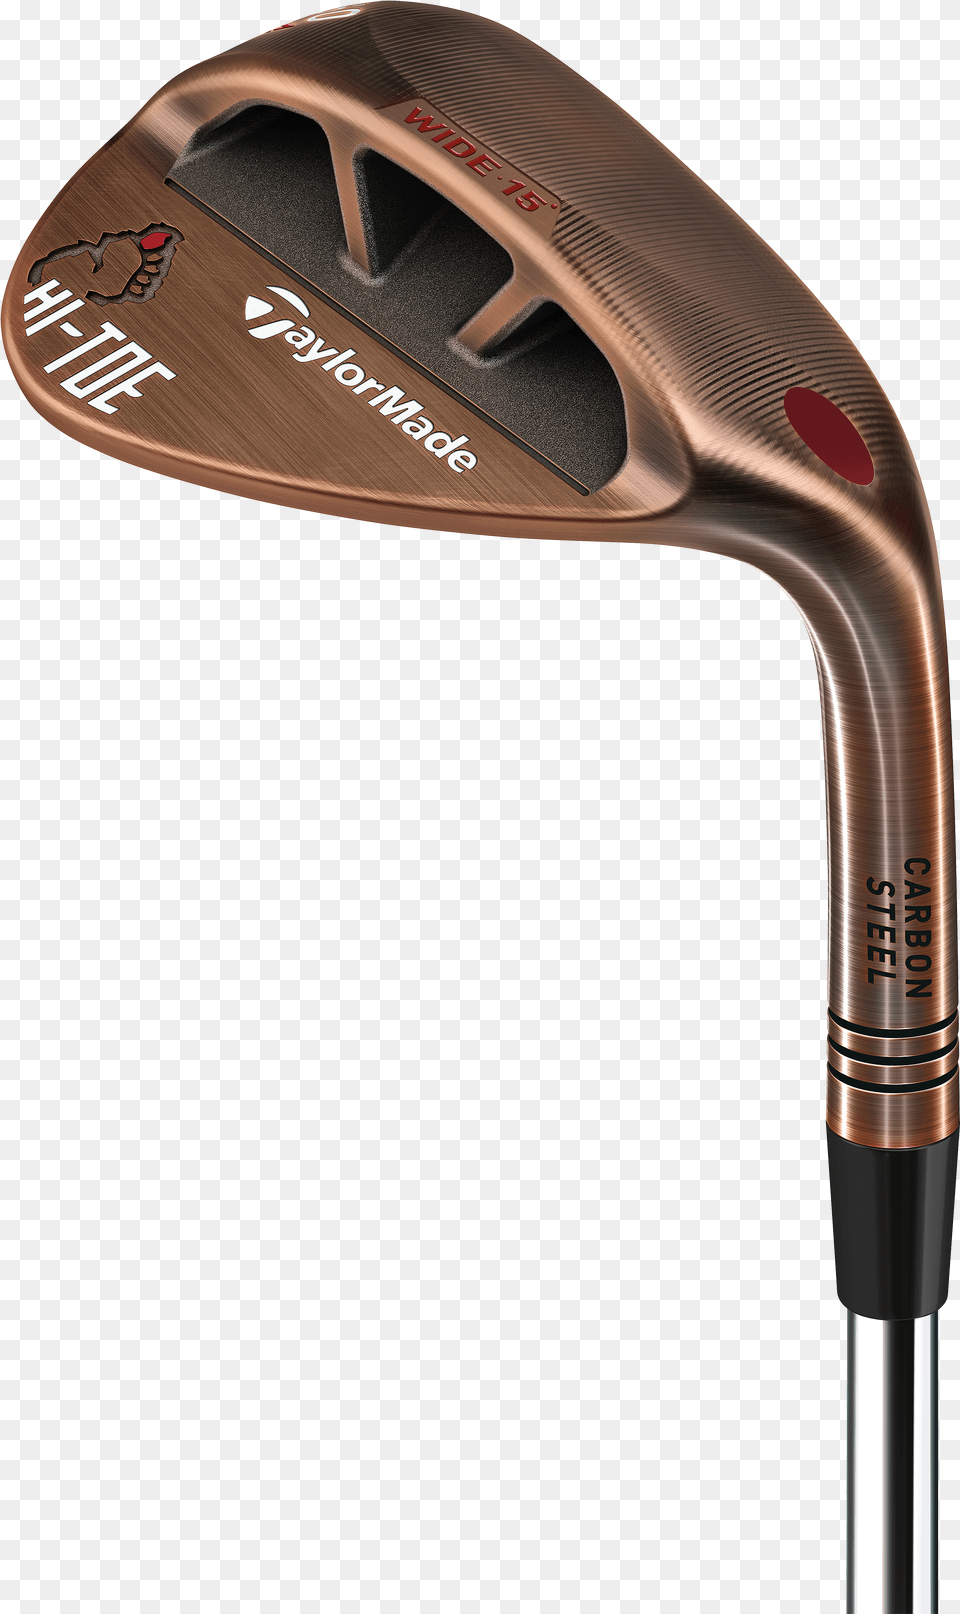 Taylormade Milled Grind, Golf, Golf Club, Sport, Putter Free Png Download